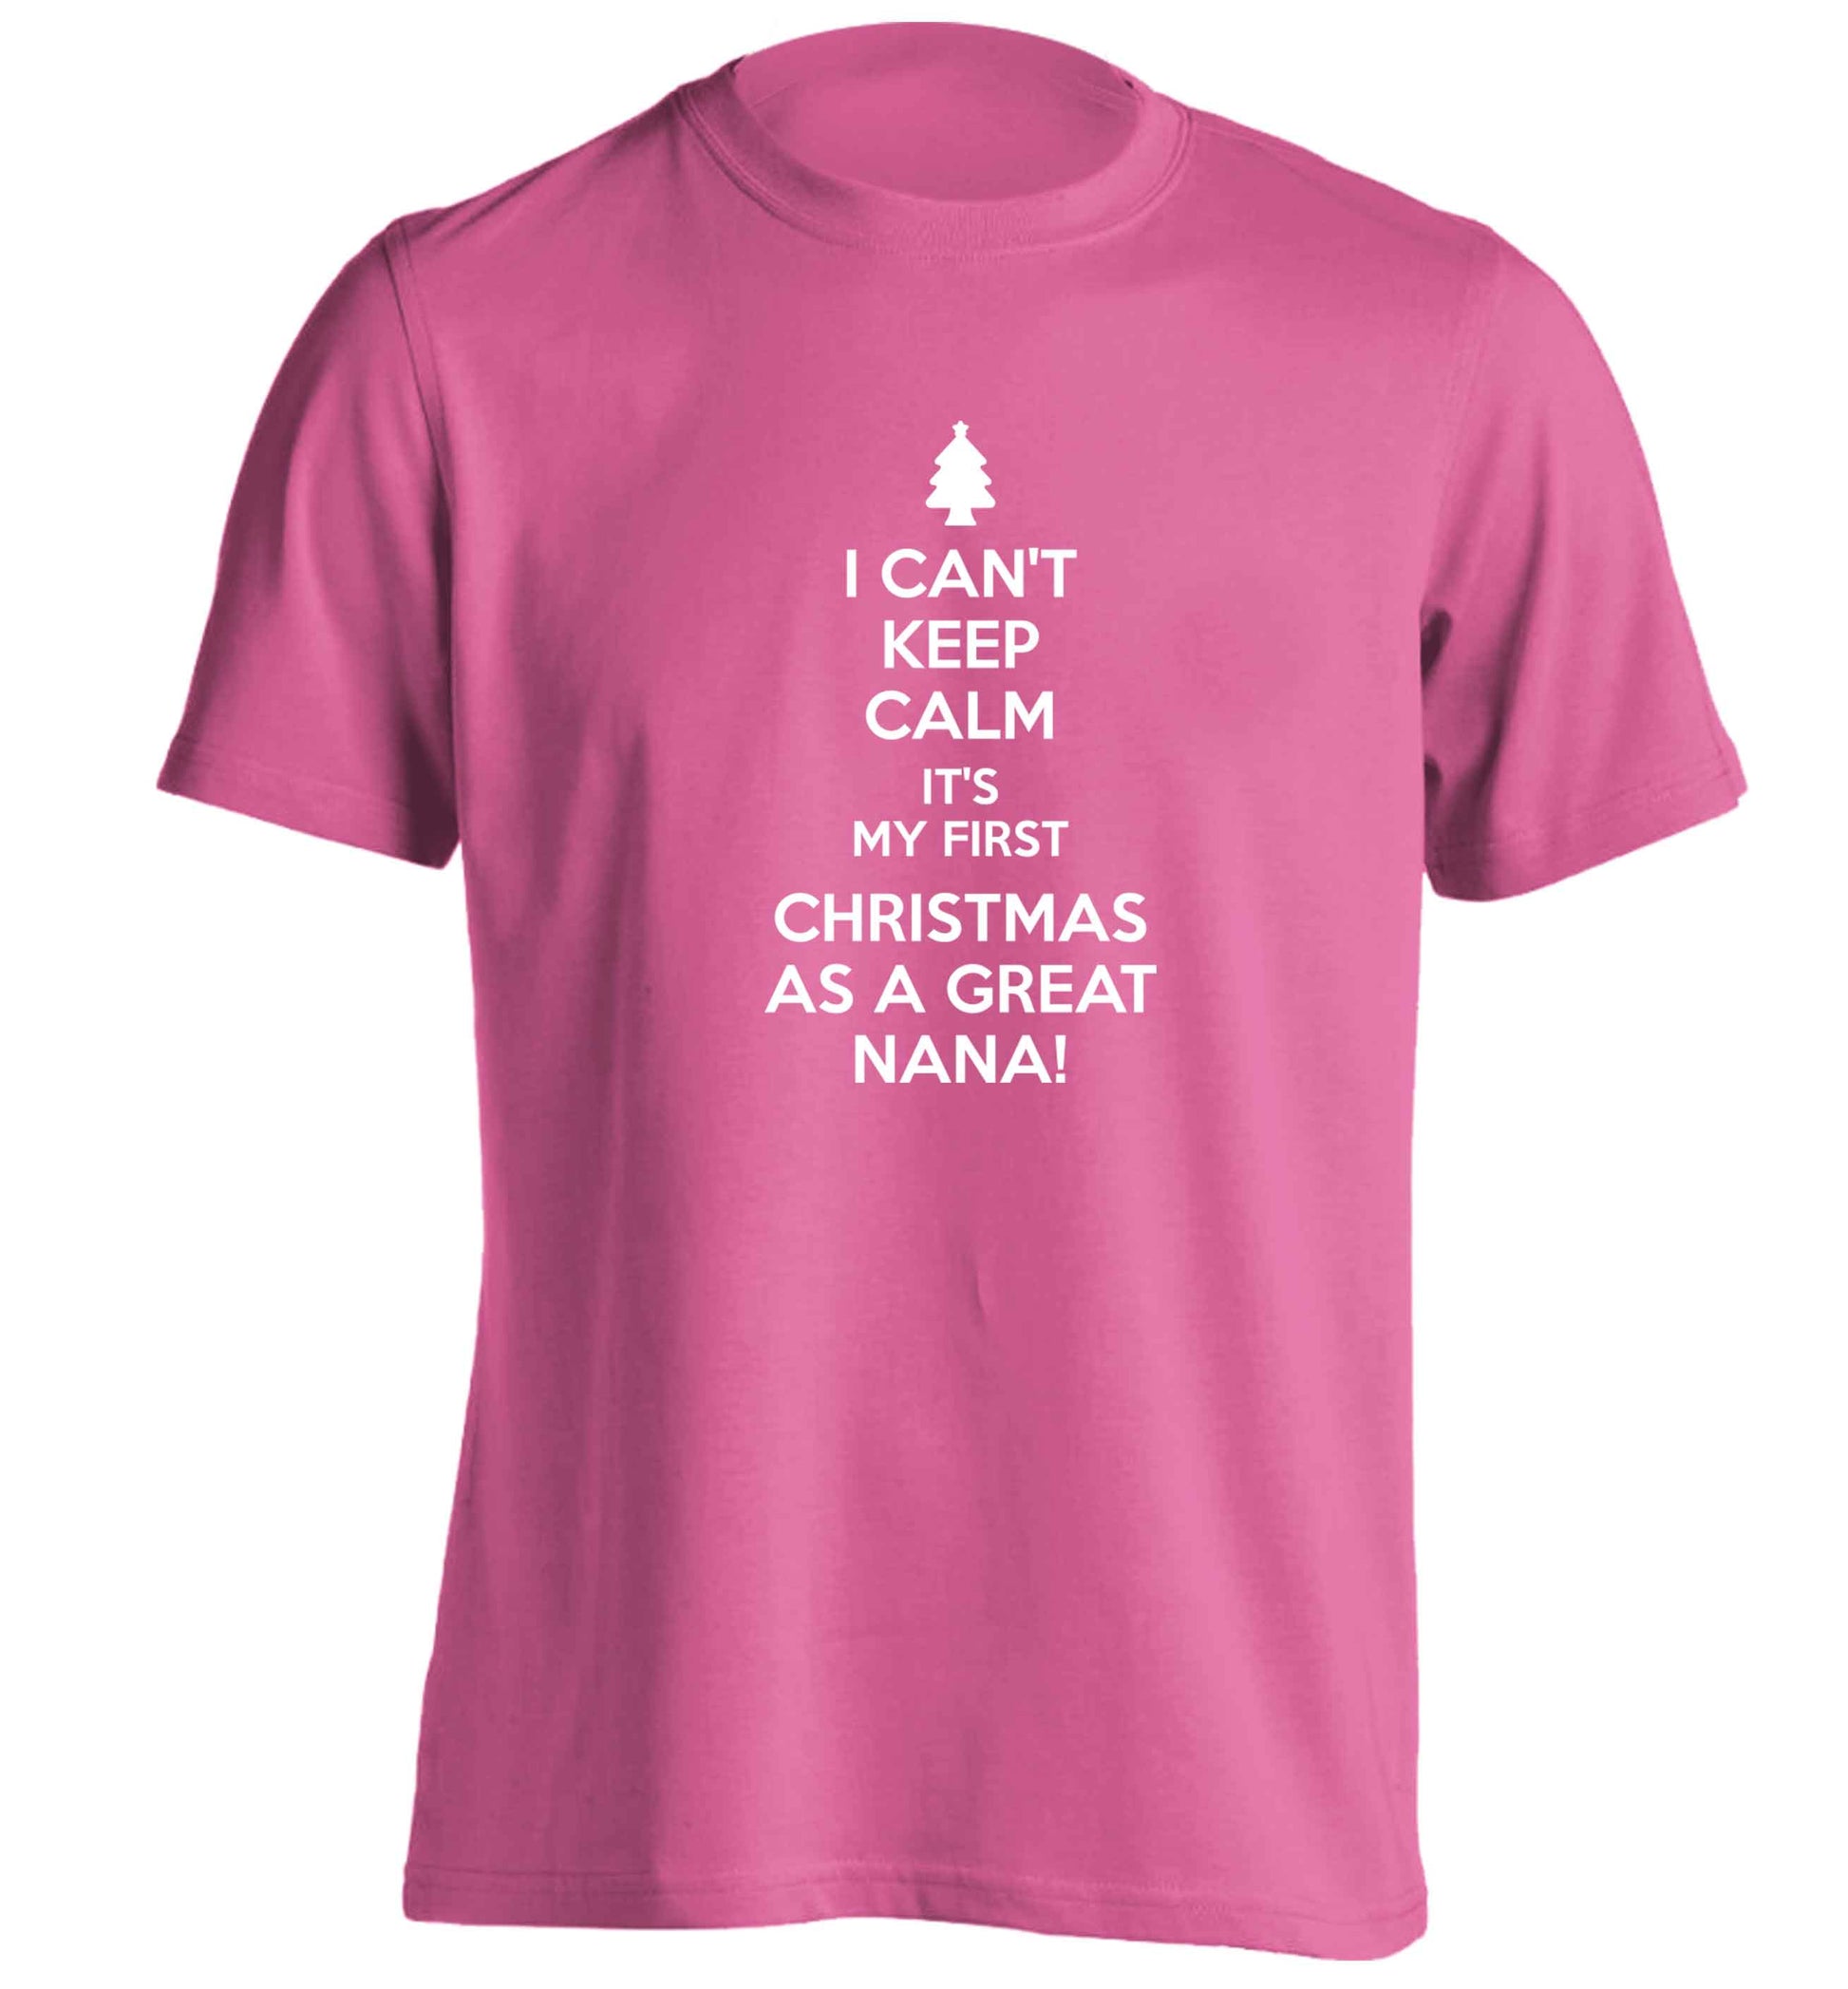 I can't keep calm it's my first Christmas as a great nana! adults unisex pink Tshirt 2XL